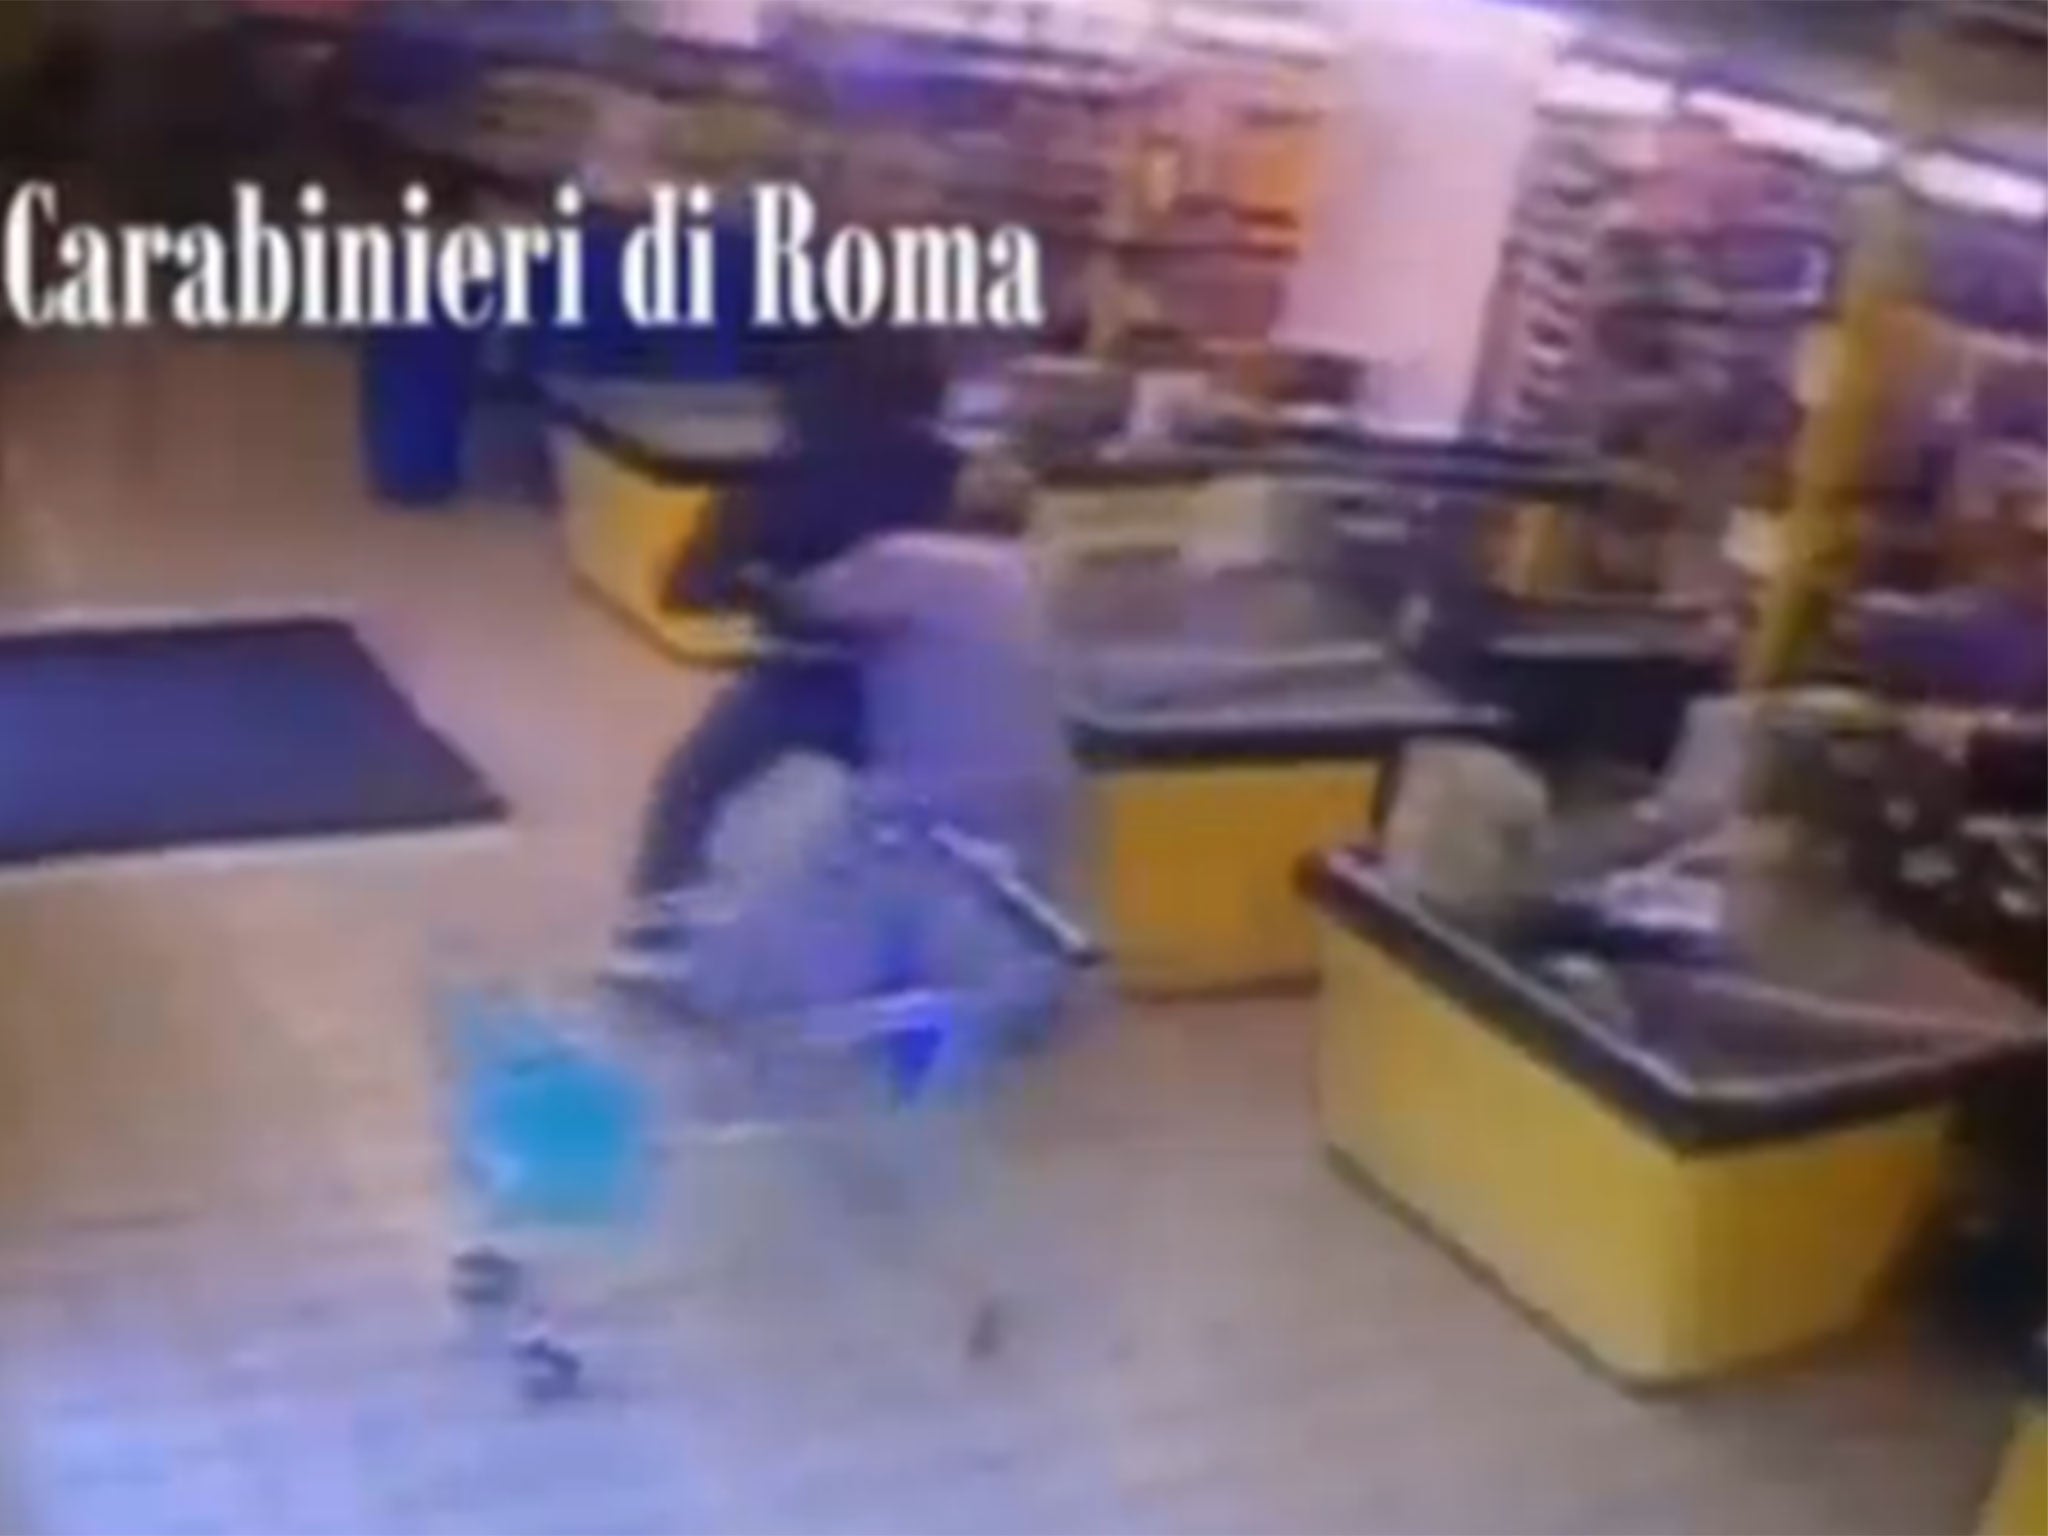 The off-duty officer got the armed robber in a bear hug